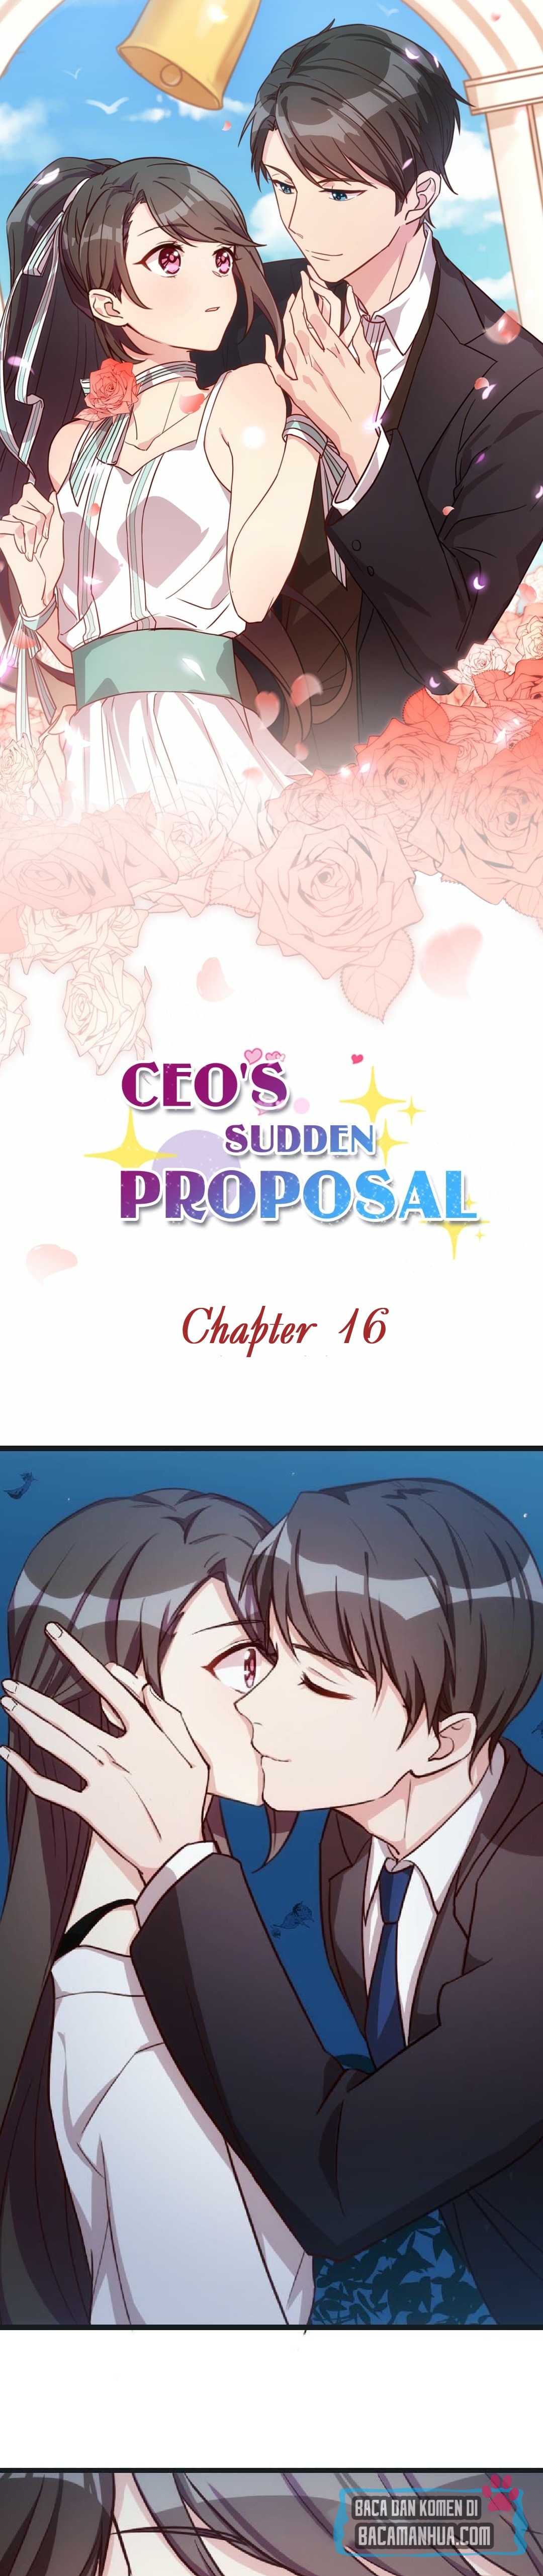 CEO’s Sudden Proposal Chapter 16